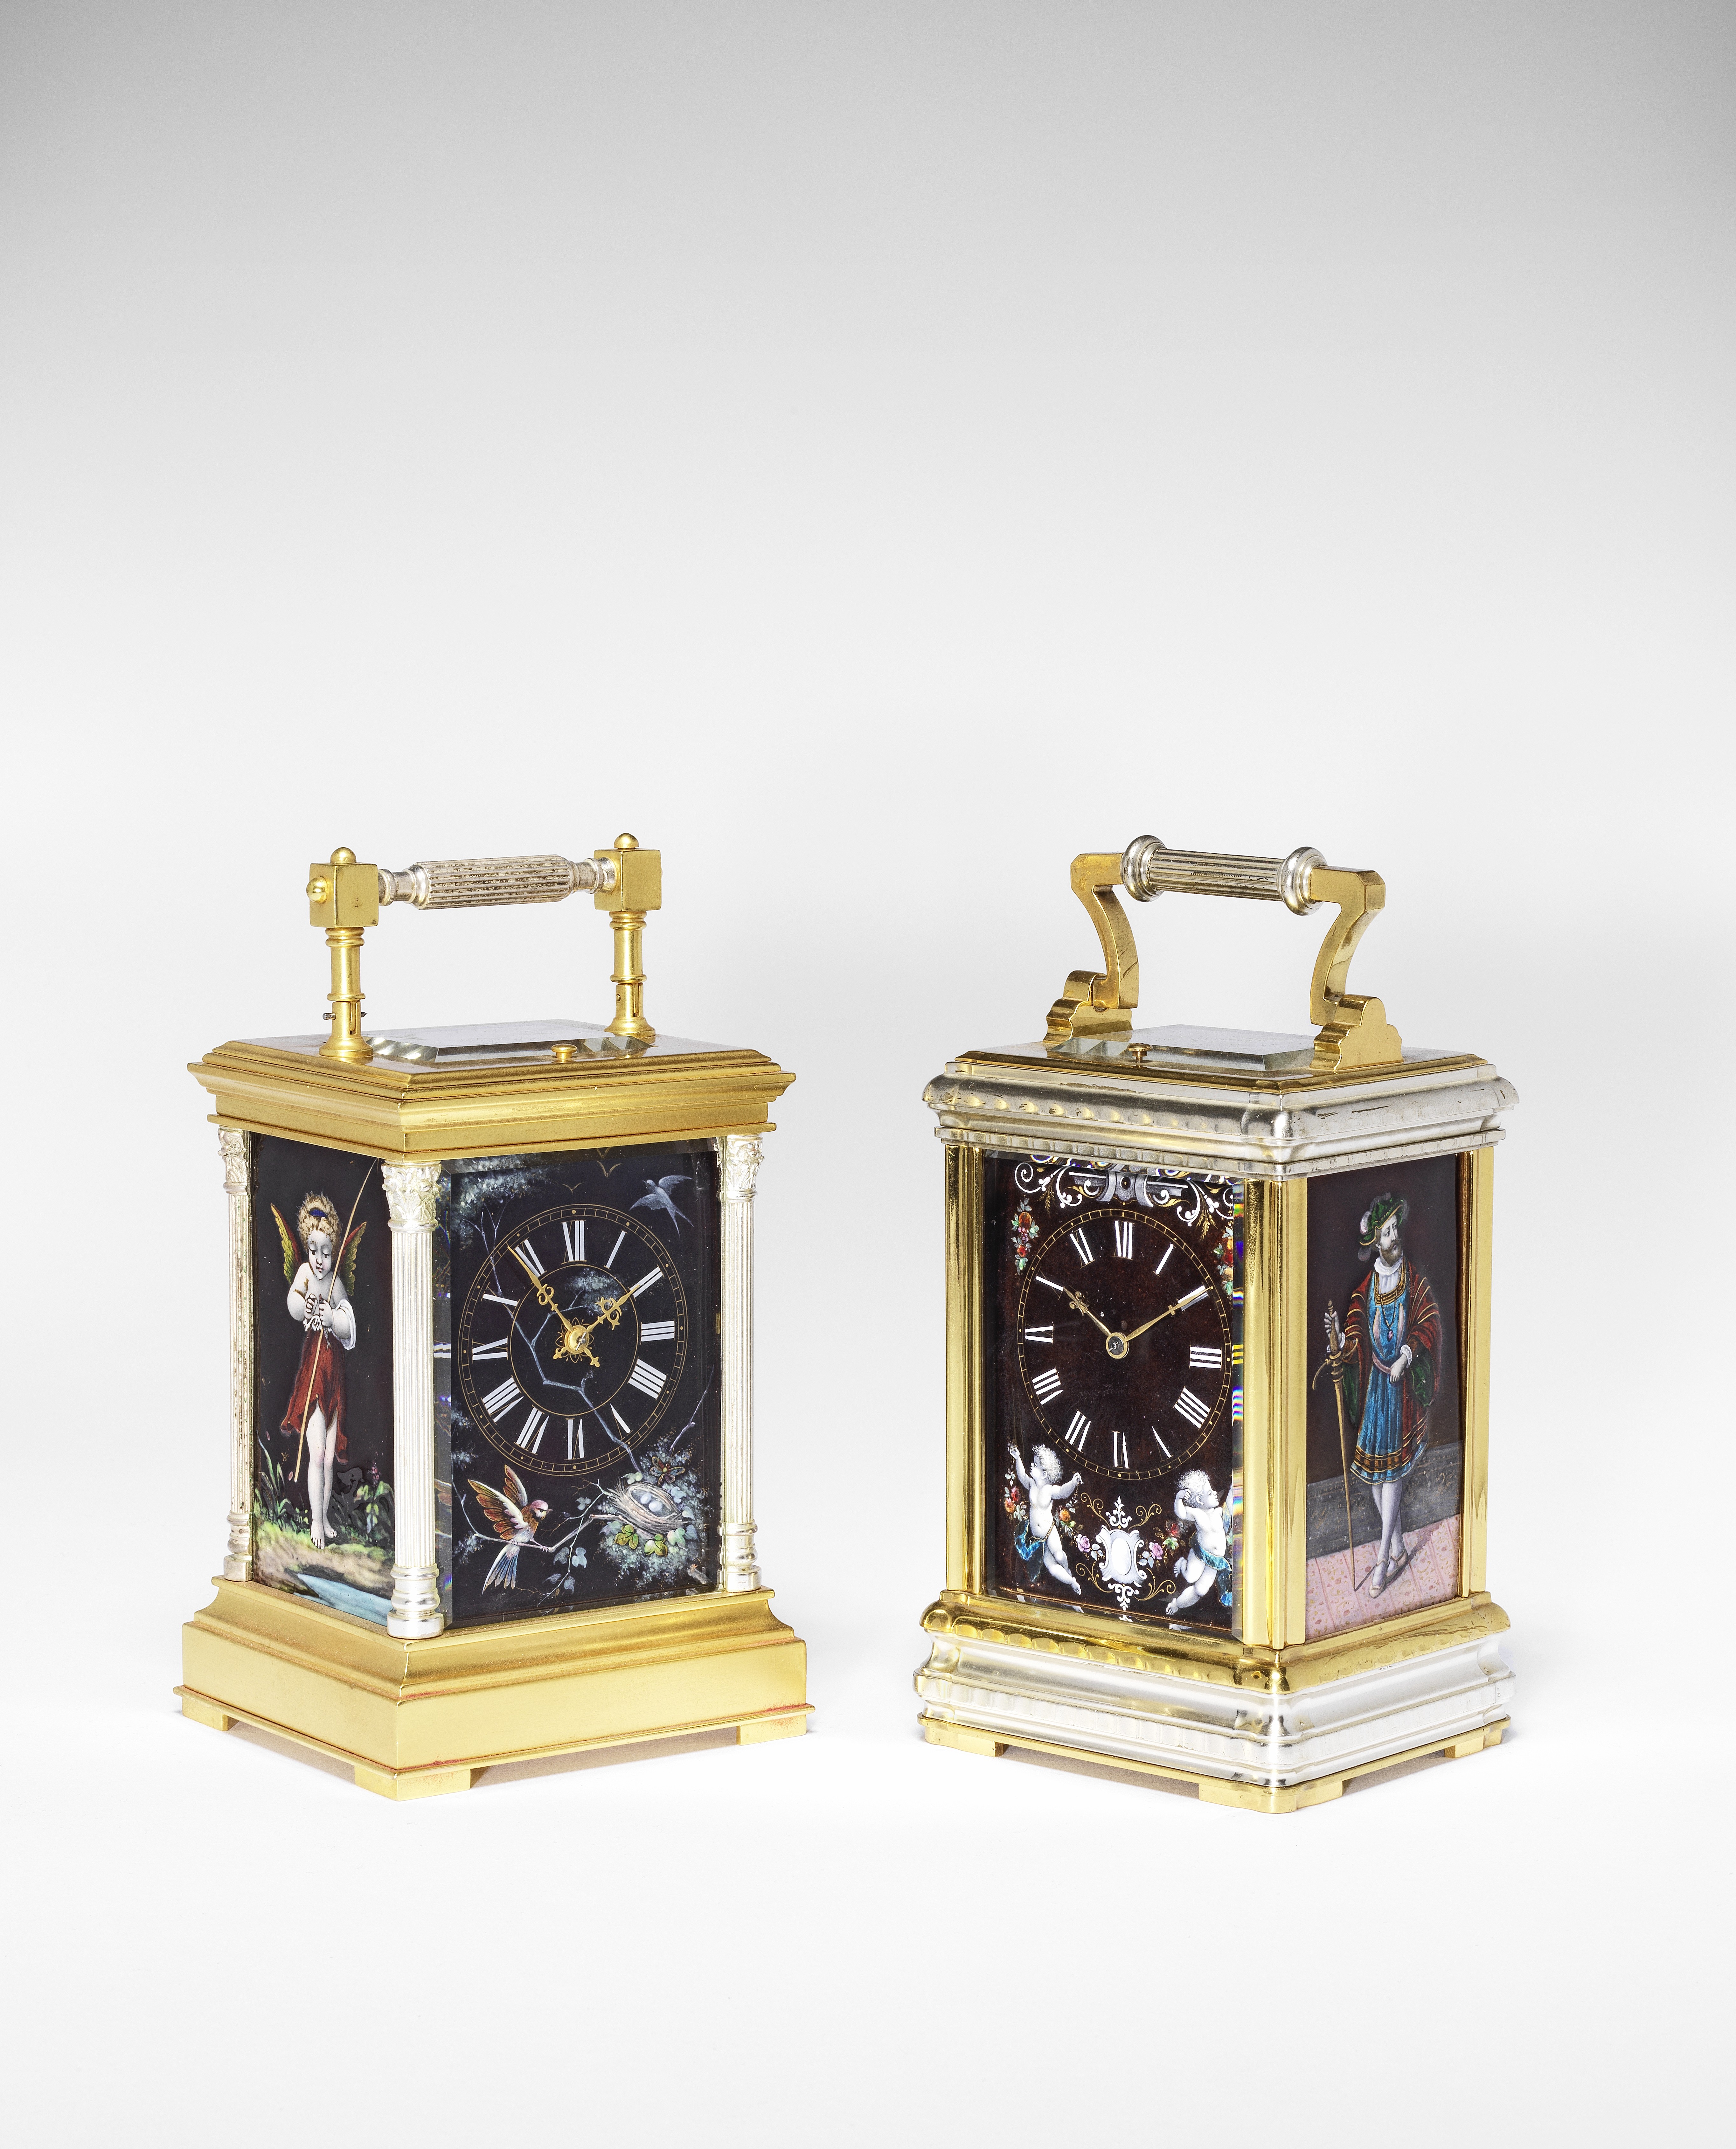 A fine and rare late 19th Century French silvered and gilt brass carriage clock set with three Li...